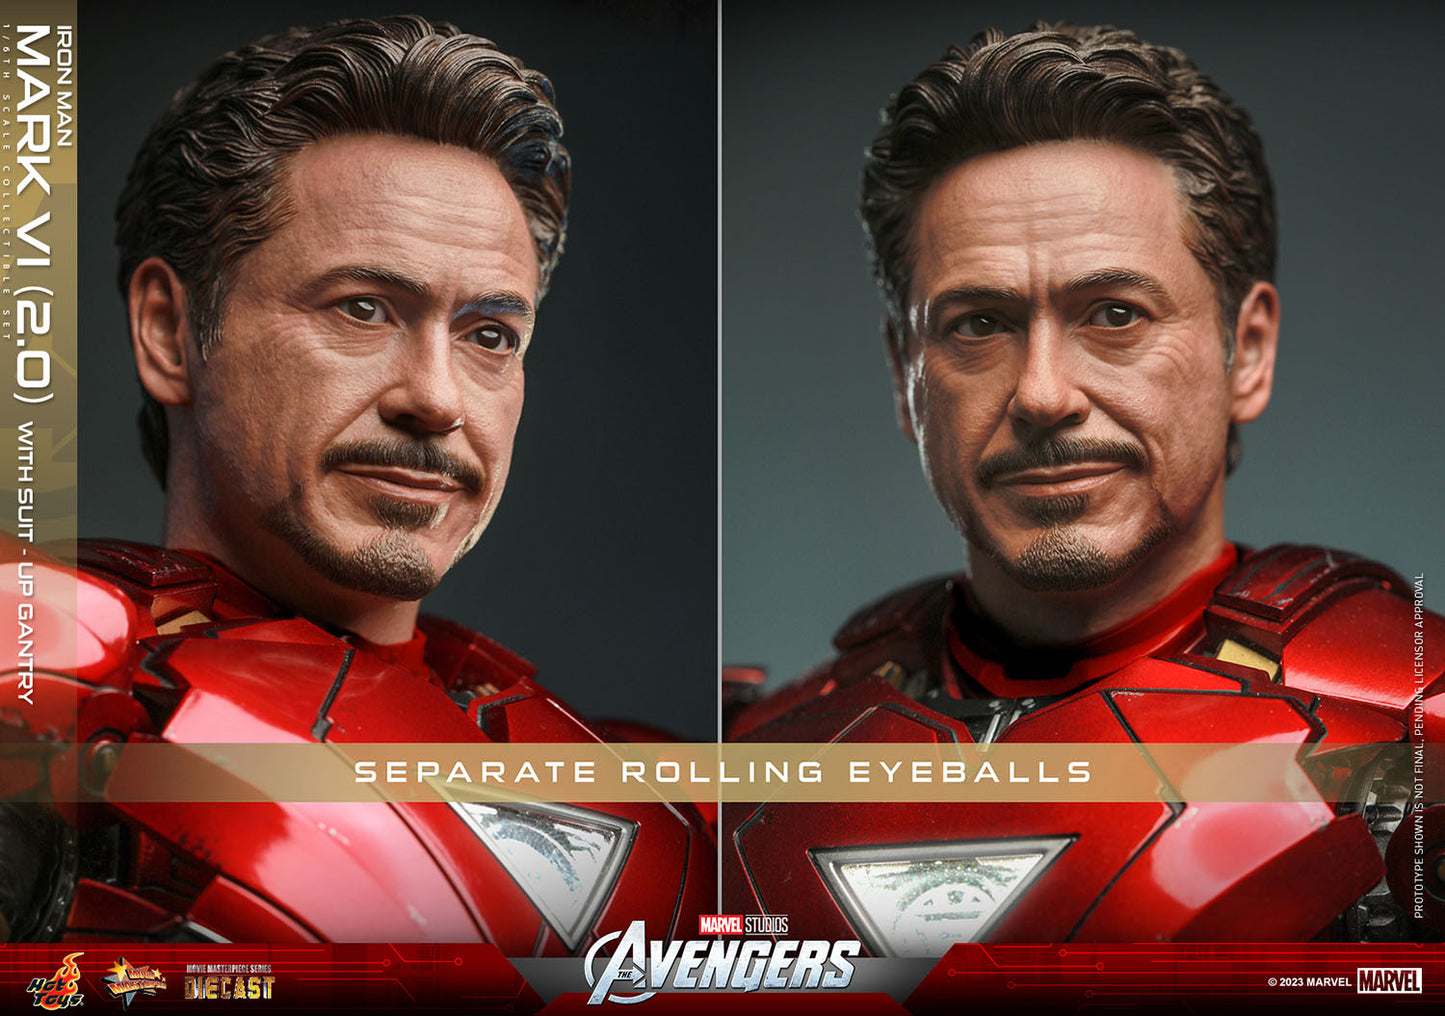 Iron Man Mark VI (2.0) with Suit-Up Gantry by Hot Toys